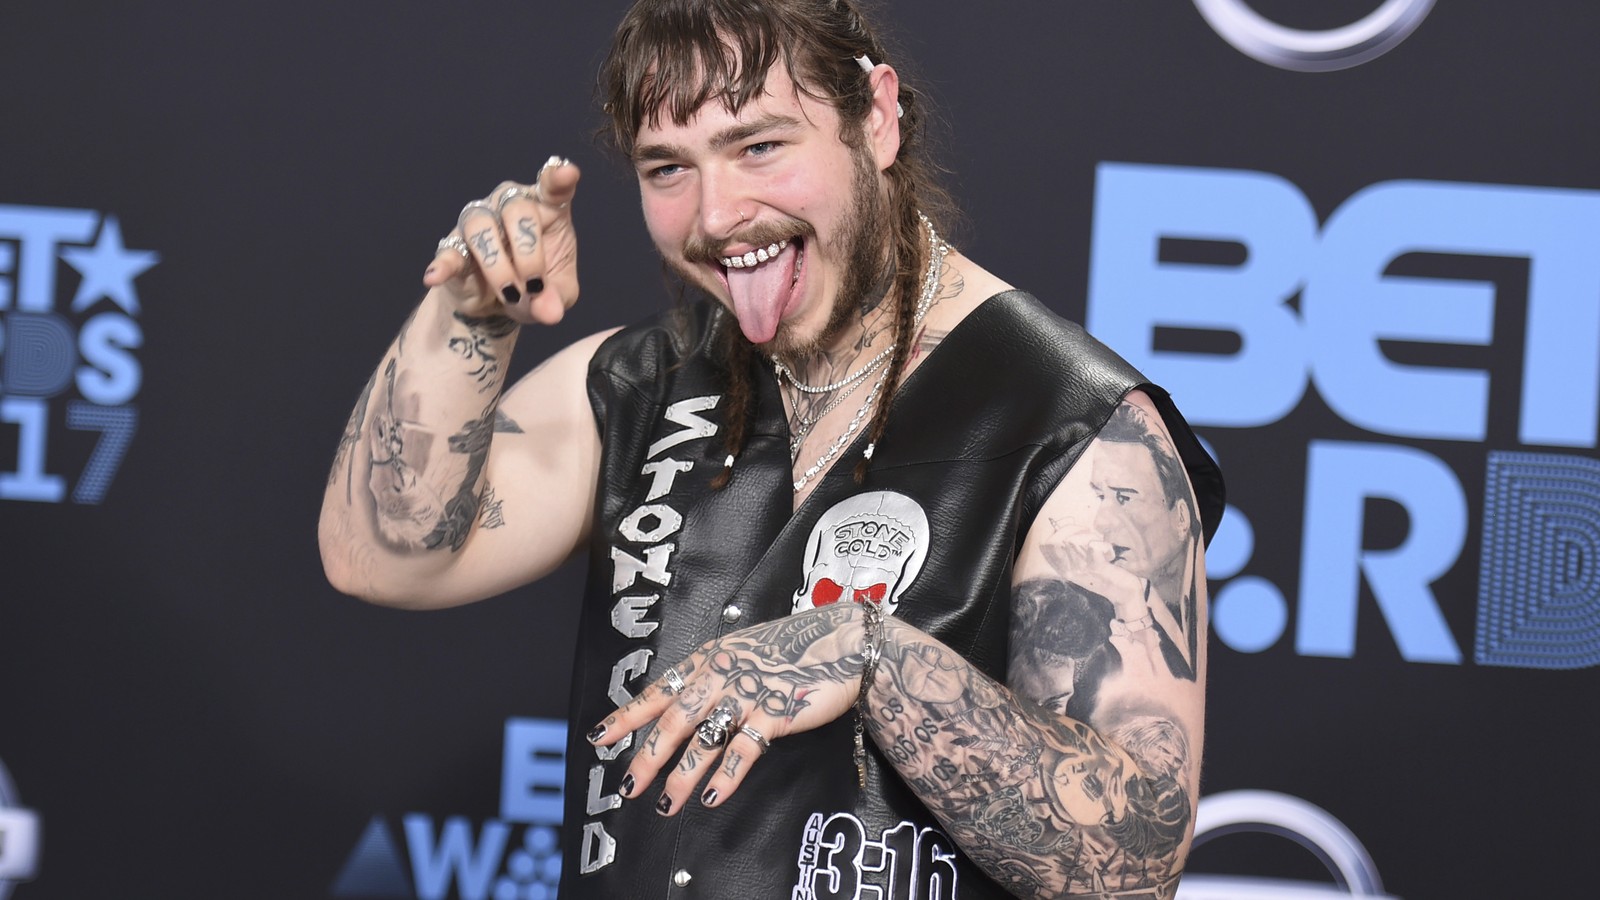 Post Malone and 21 Savage's 'Rockstar' Is Rap's Victory Cry - The